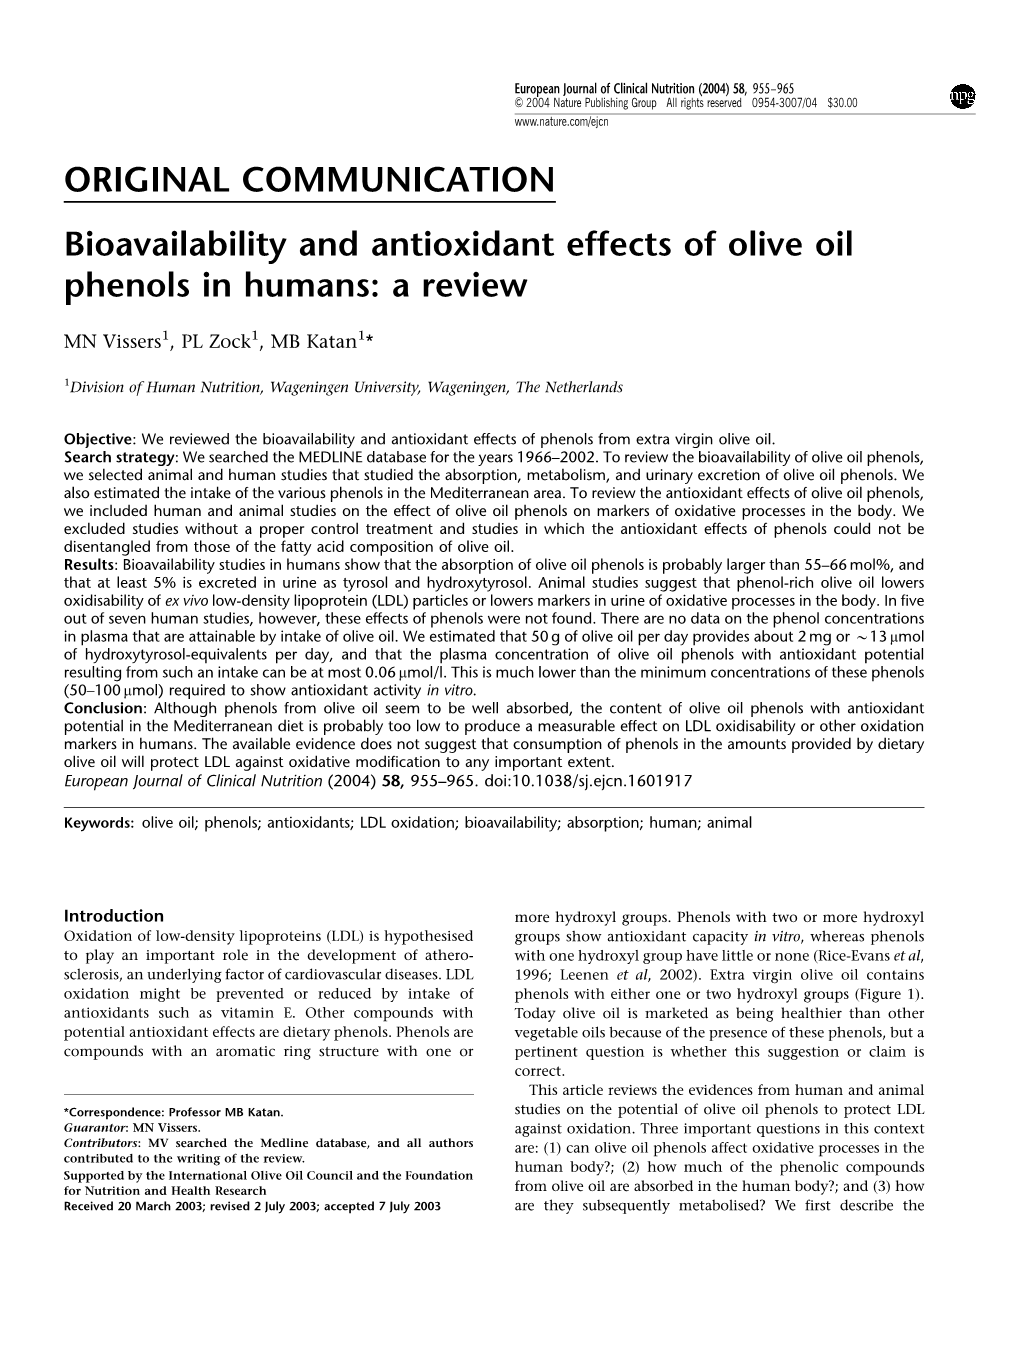 ORIGINAL COMMUNICATION Bioavailability and Antioxidant Effects of Olive Oil Phenols in Humans: a Review